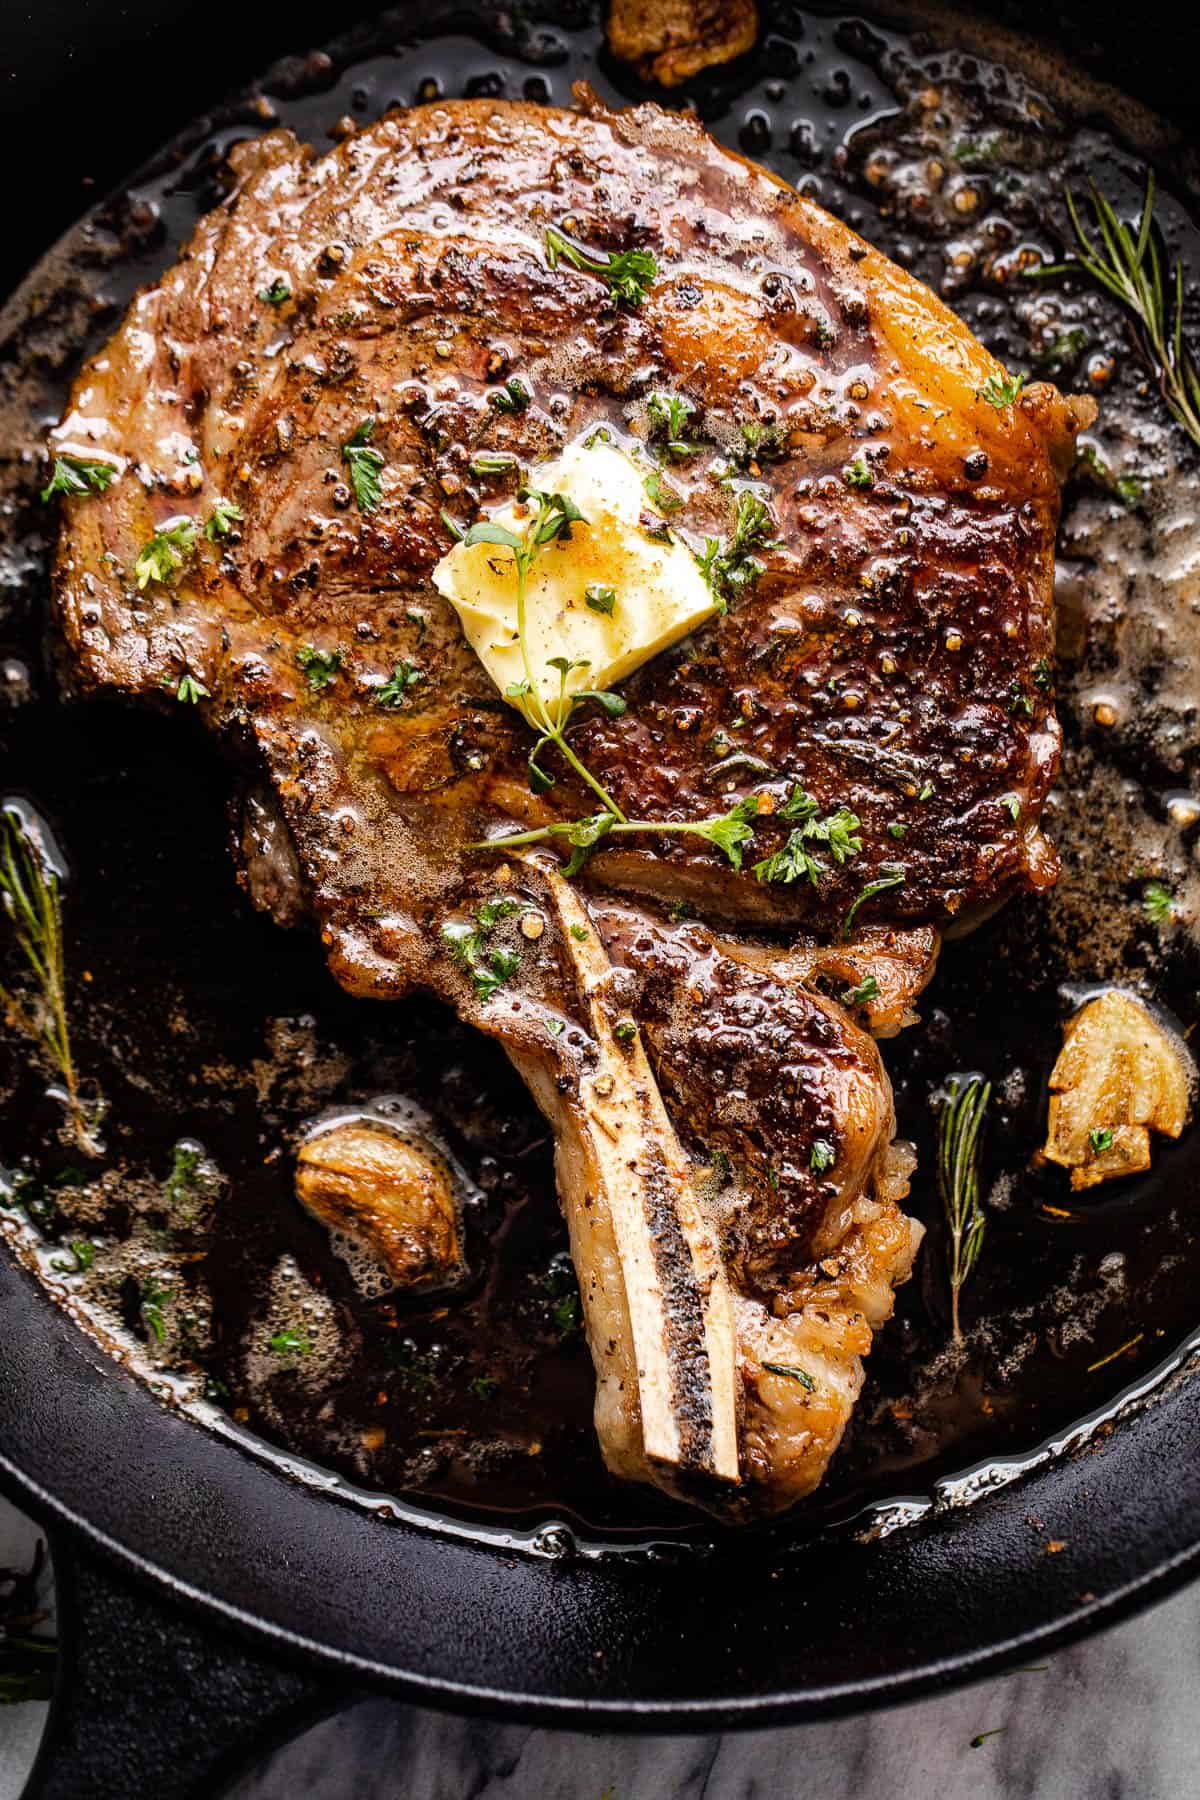 Overhead shot of a ribeye steak cooking in a cast iron skillet.